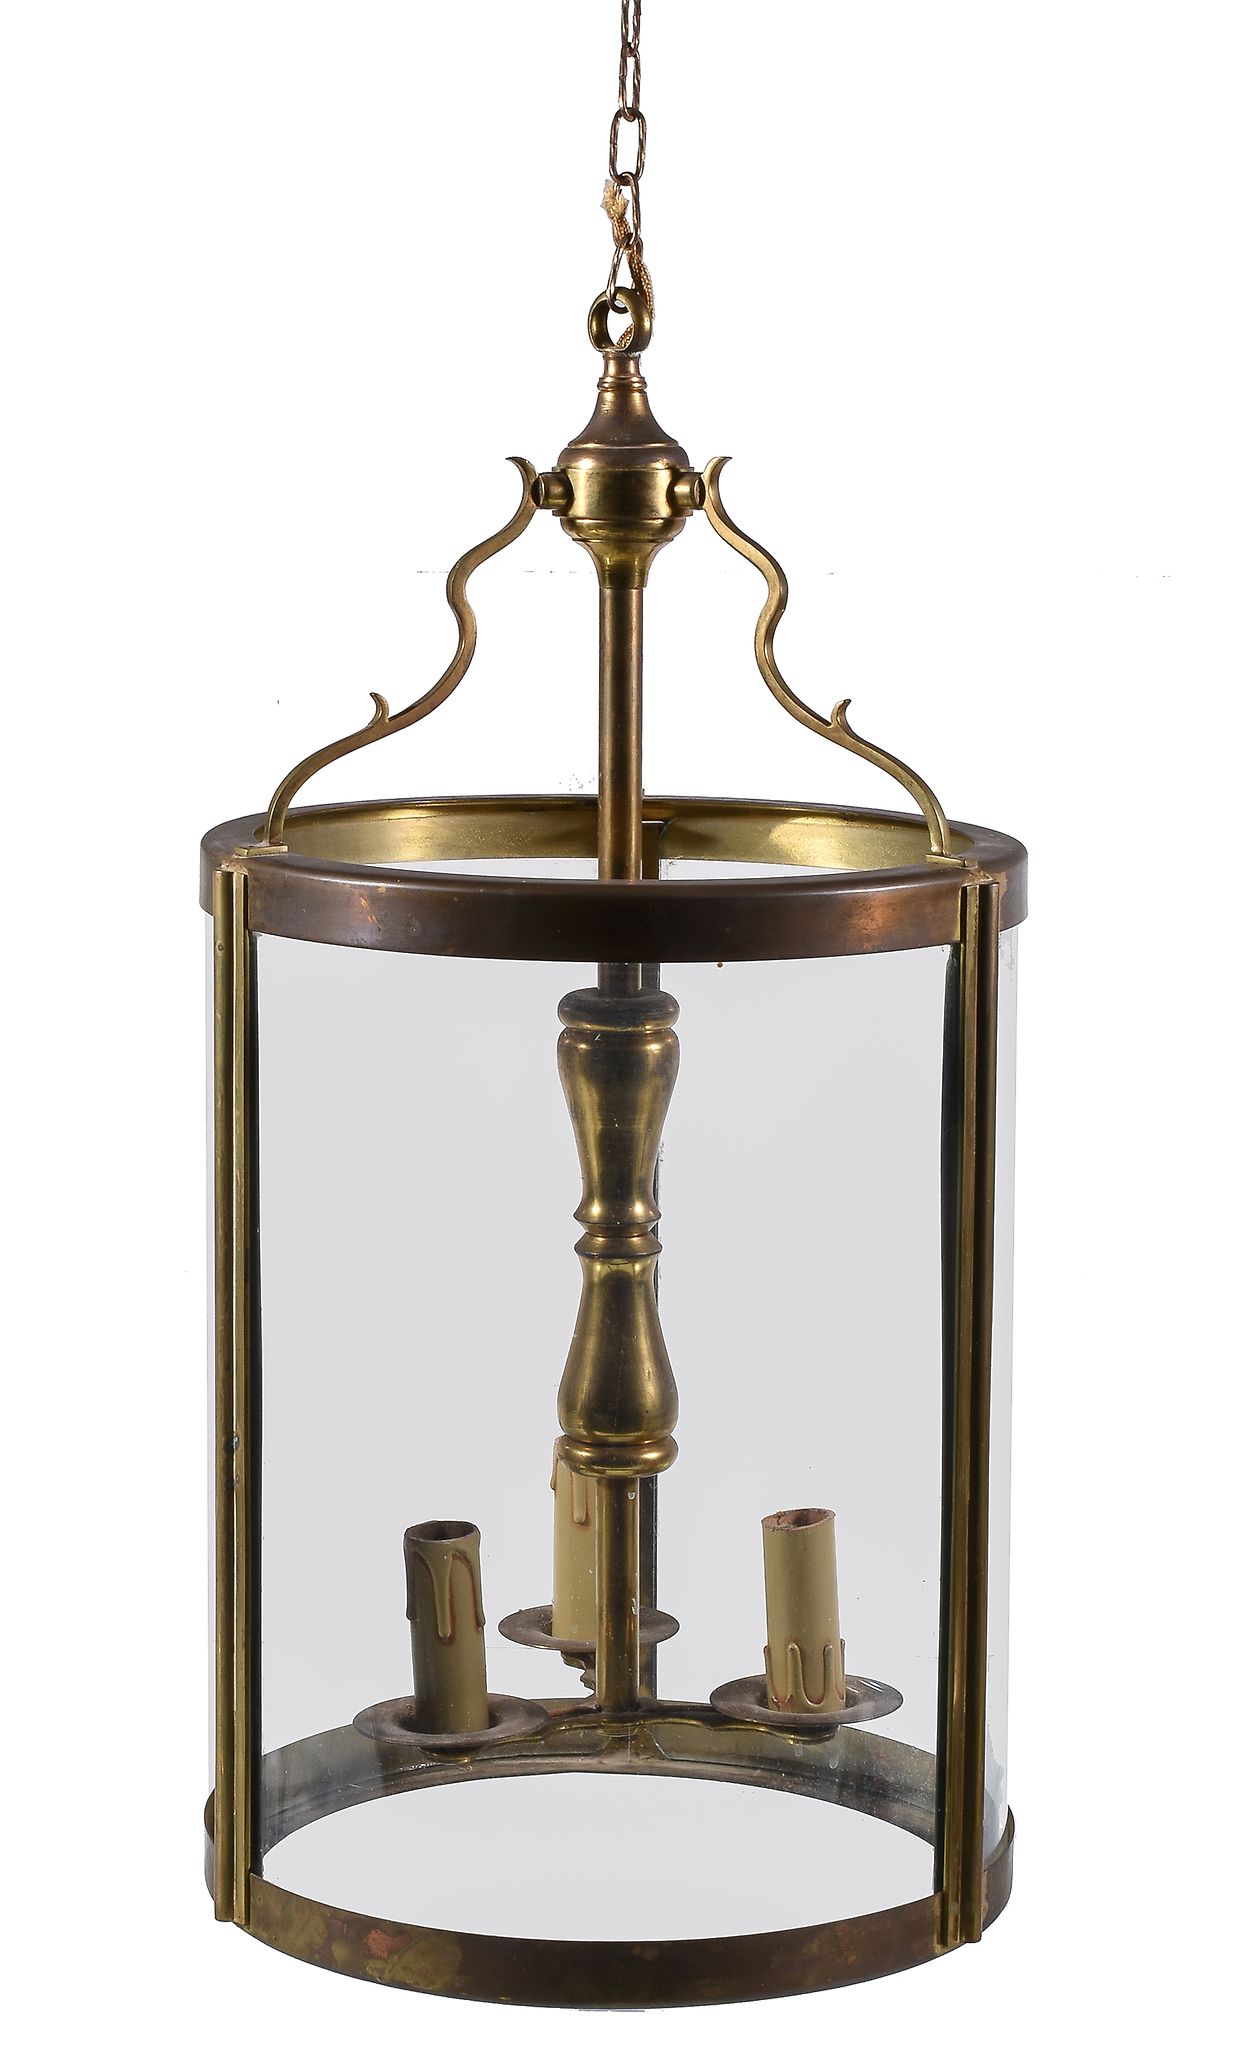 A gilt brass and glazed cylindrical hall or porch lantern, mid 20th century, with three serpentine